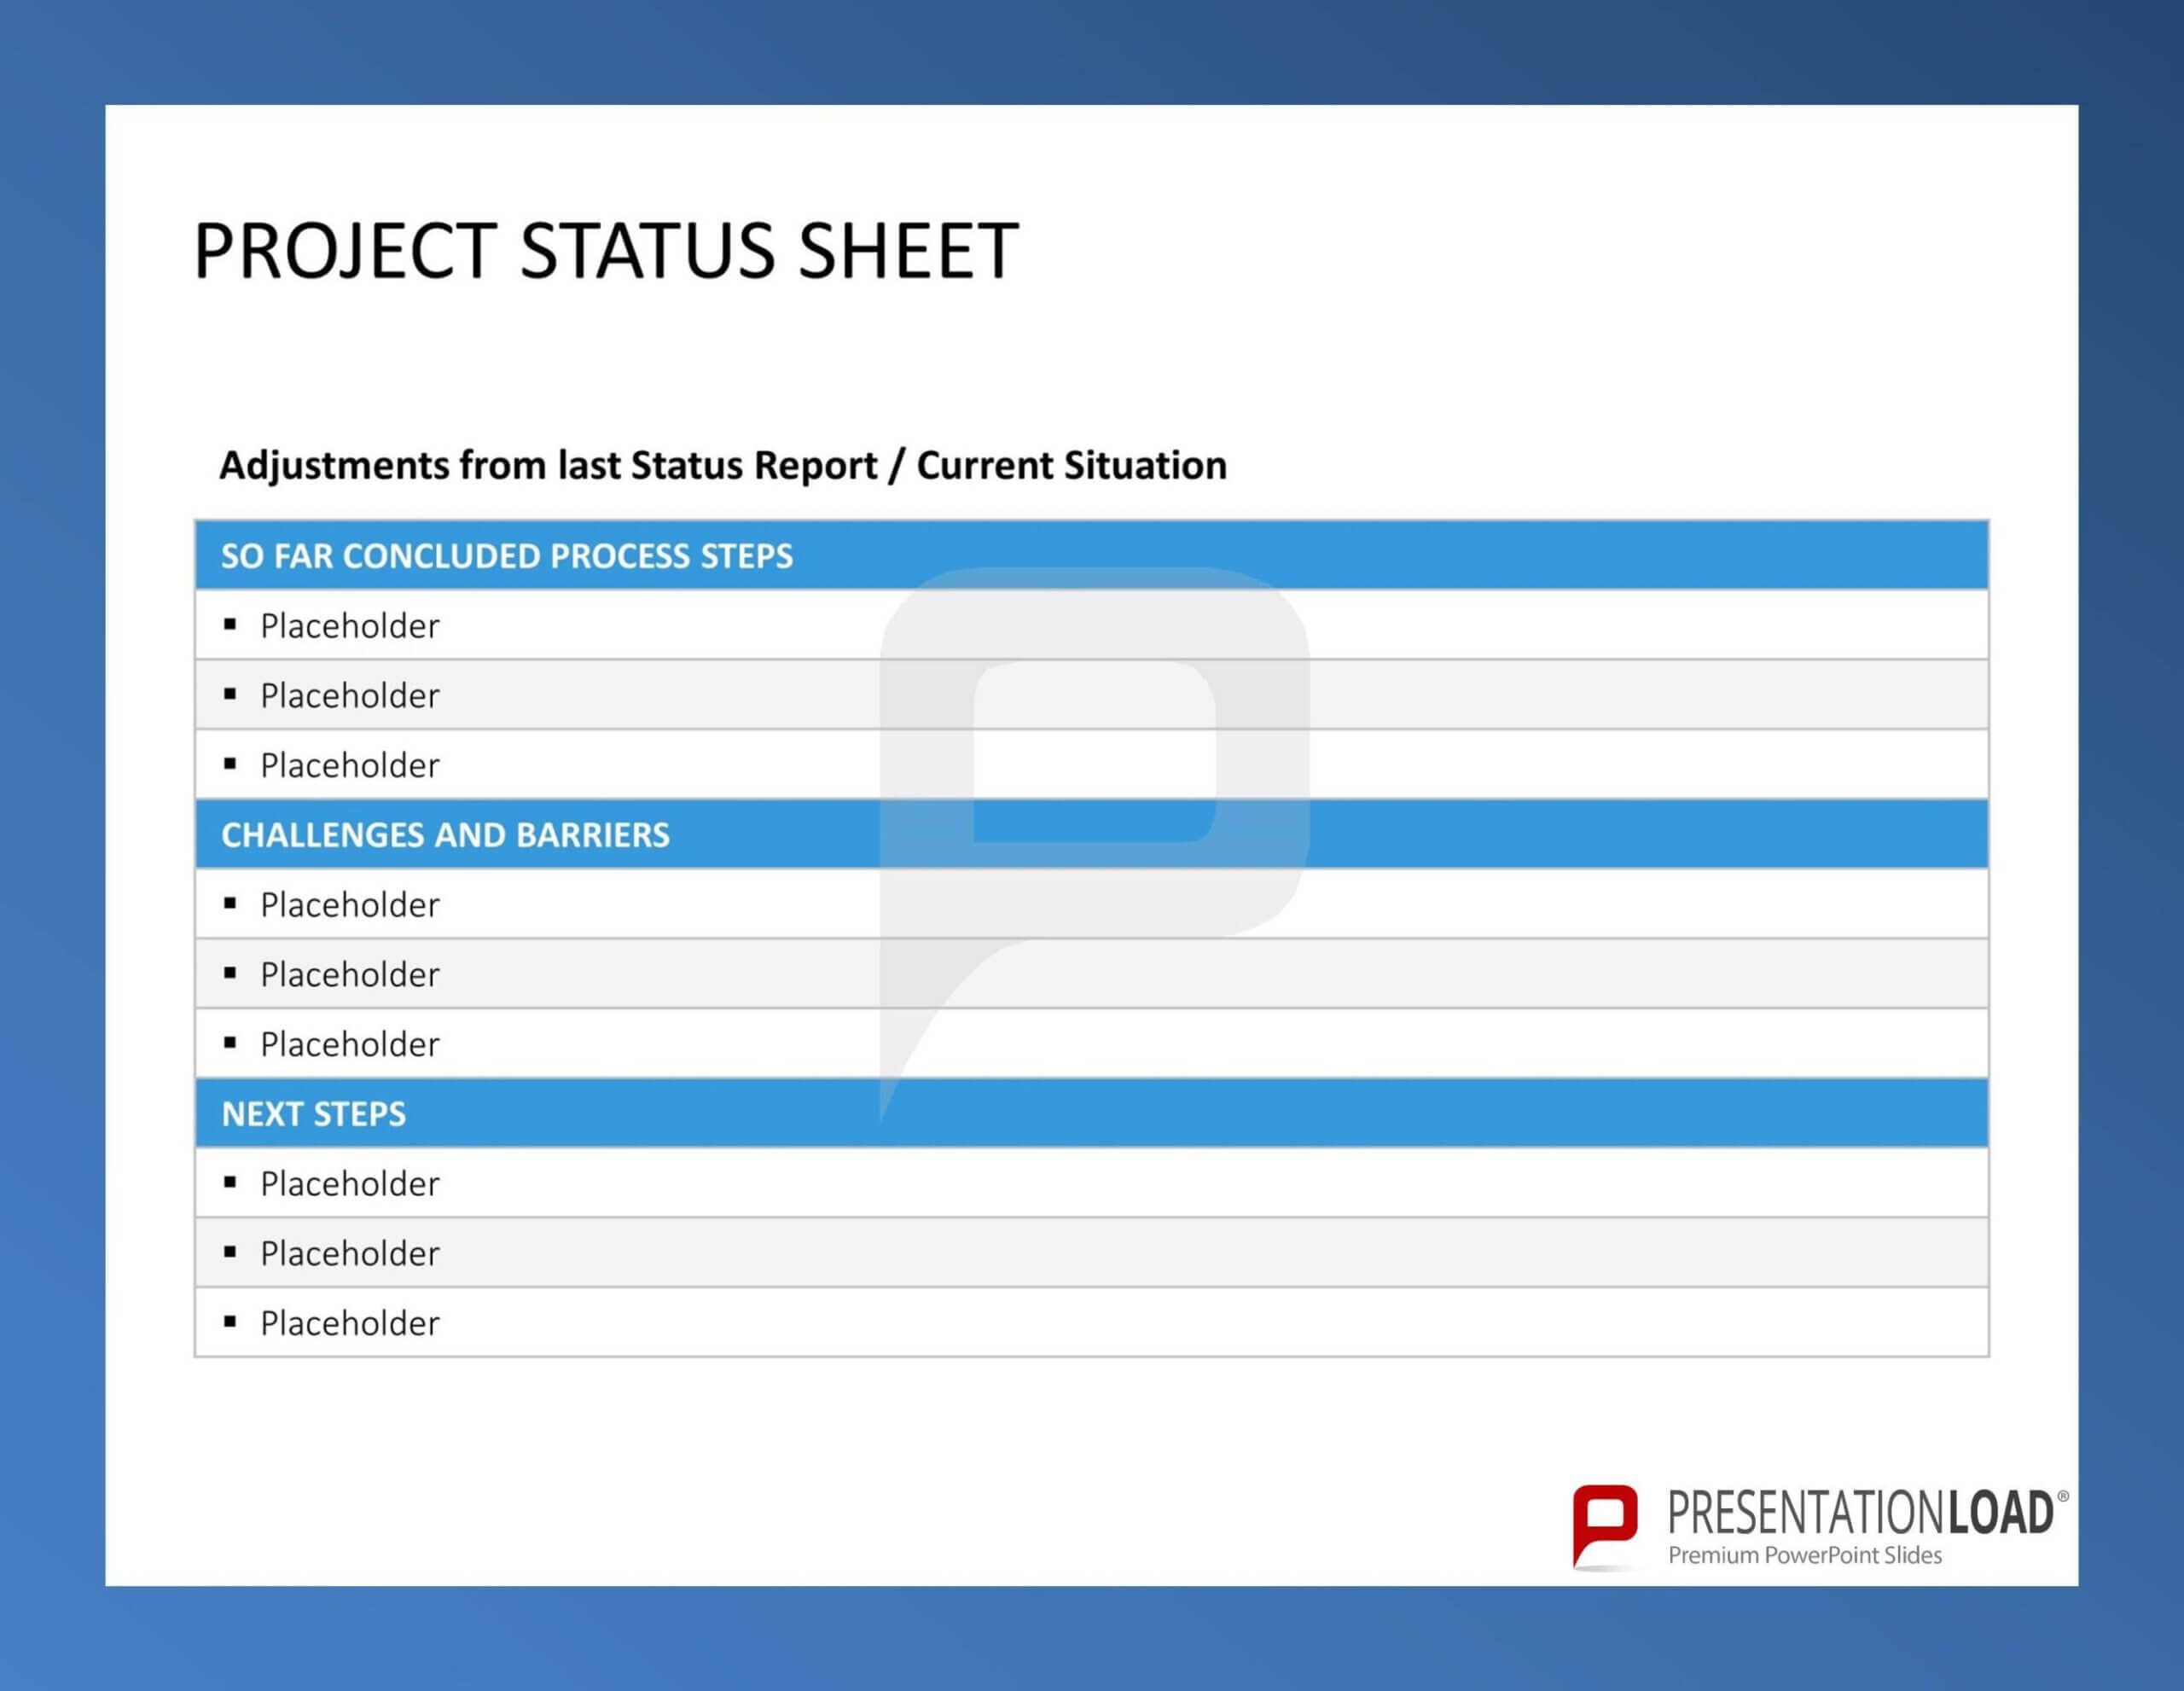 Pinpresentationload On Quality Management // Powerpoint Throughout Weekly Project Status Report Template Powerpoint